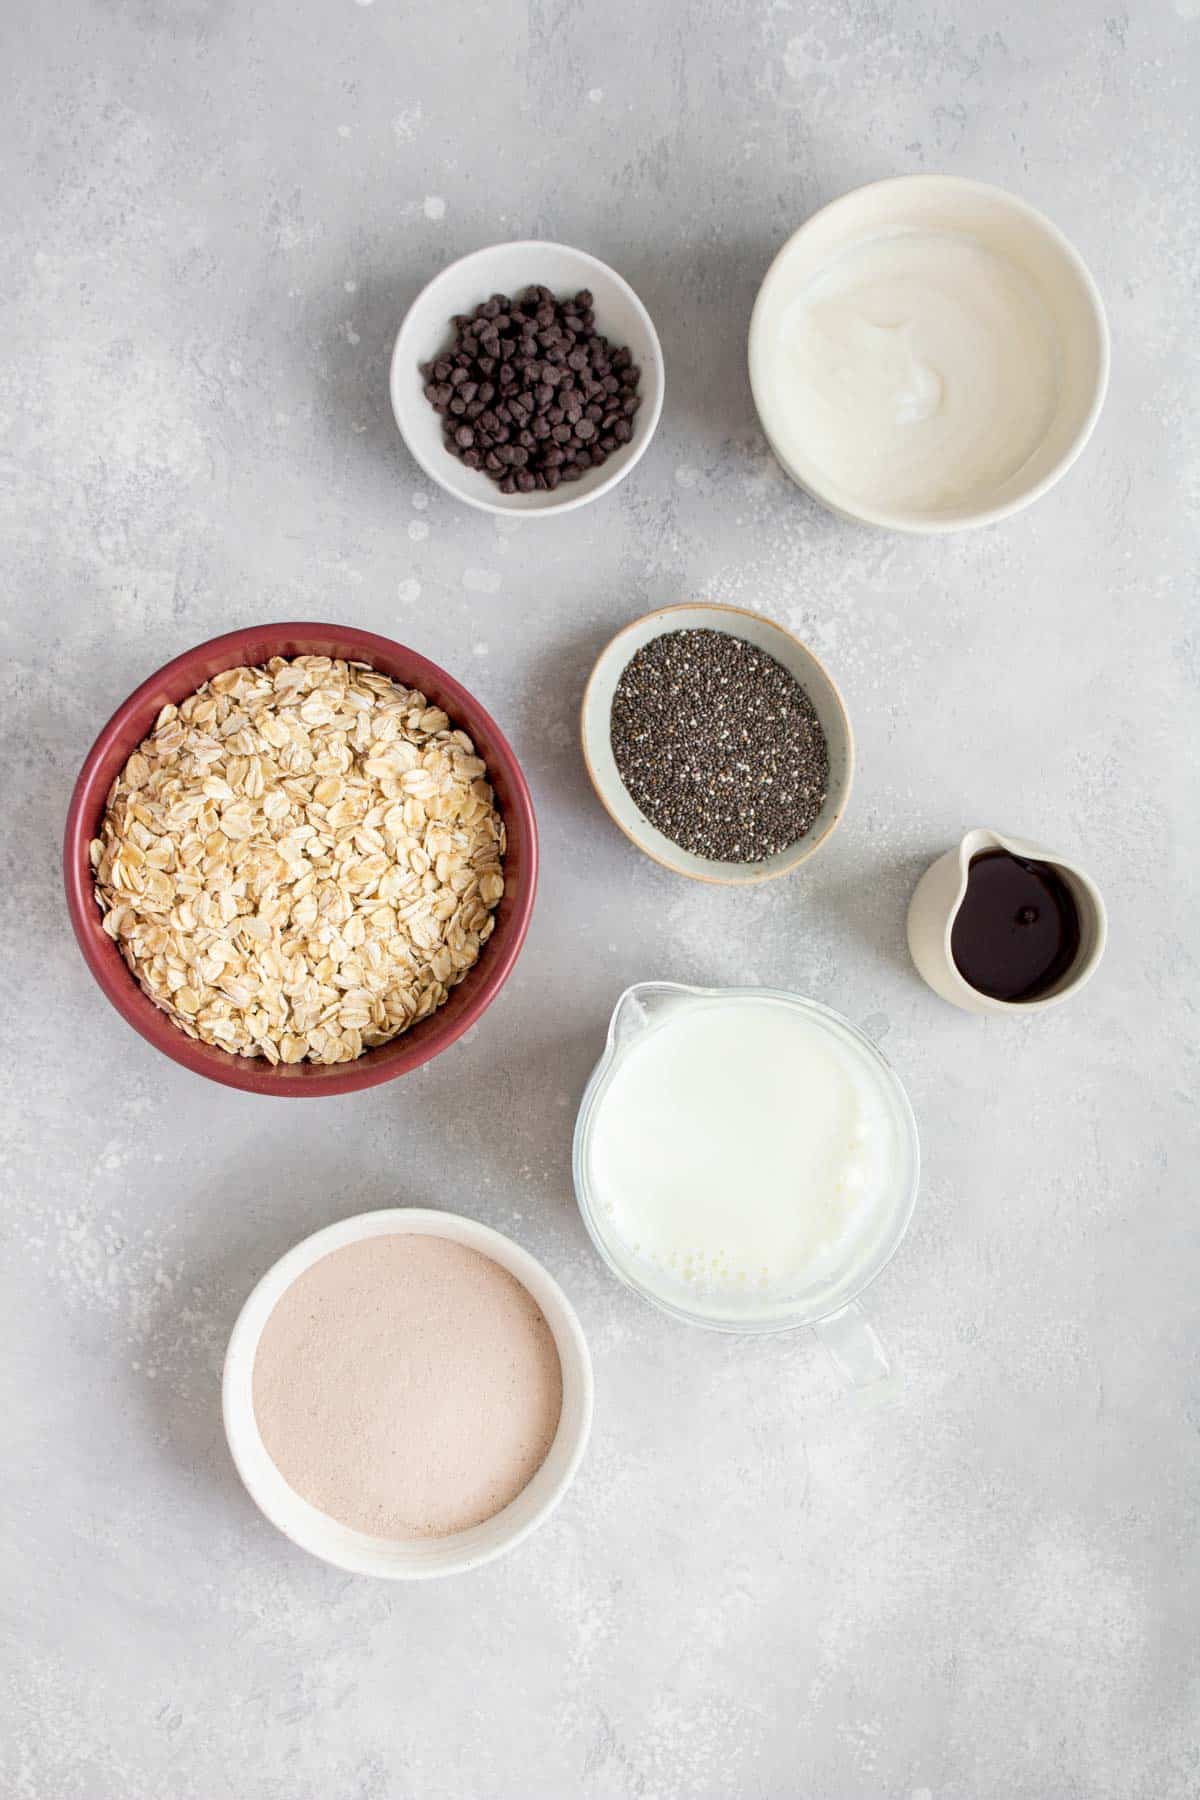 Ingredients needed to make chocolate protein overnight oats.